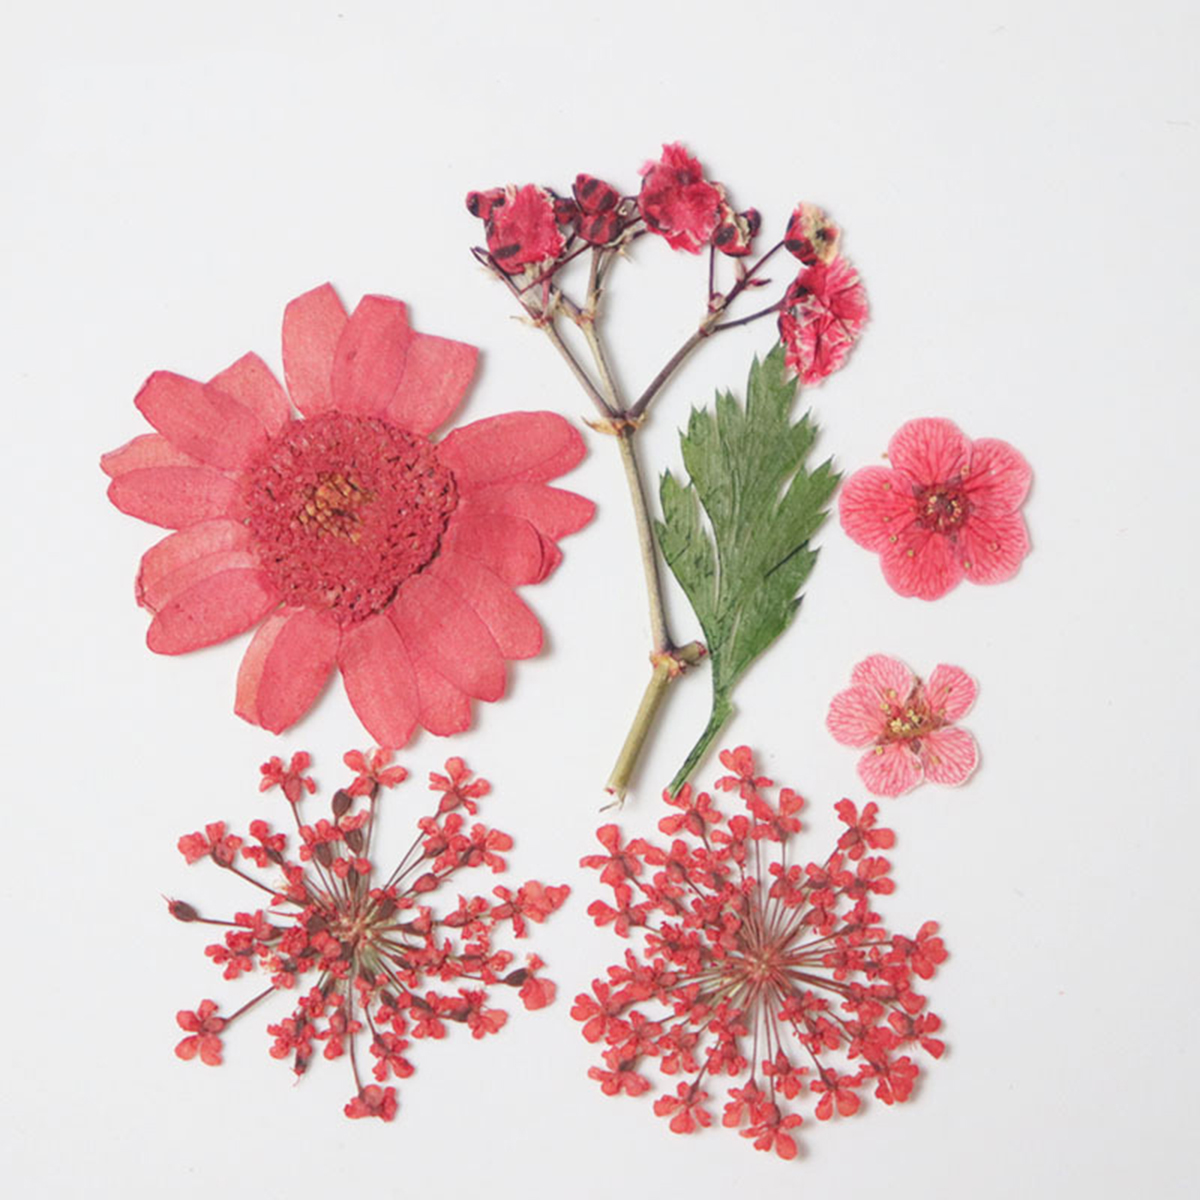 Picture of Real Dried Flower Resin Jewelry Craft Filling Material Red 3.8cm x 2.5cm - 0.7cm x 0.7cm, 1 Packet ( 7 PCs/Packet)